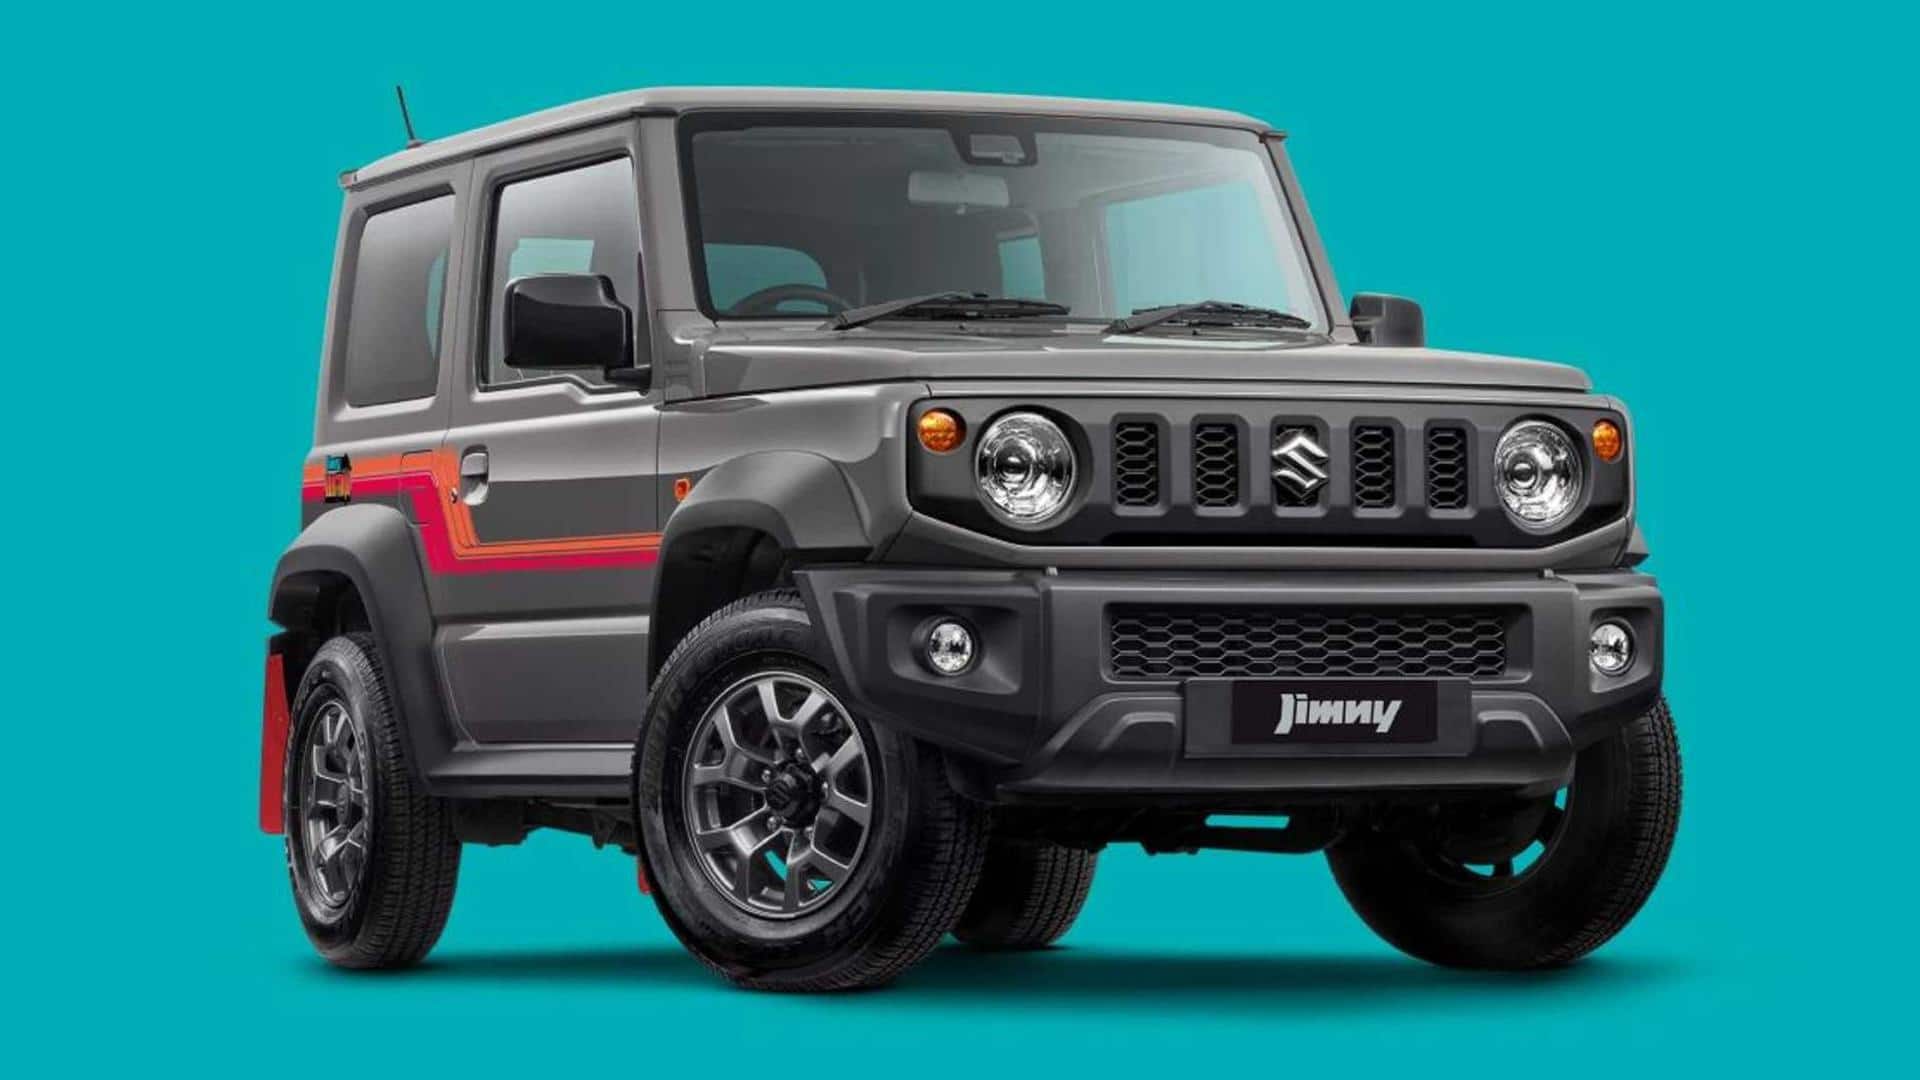 Suzuki Jimny Heritage Special Edition breaks cover: Check top features